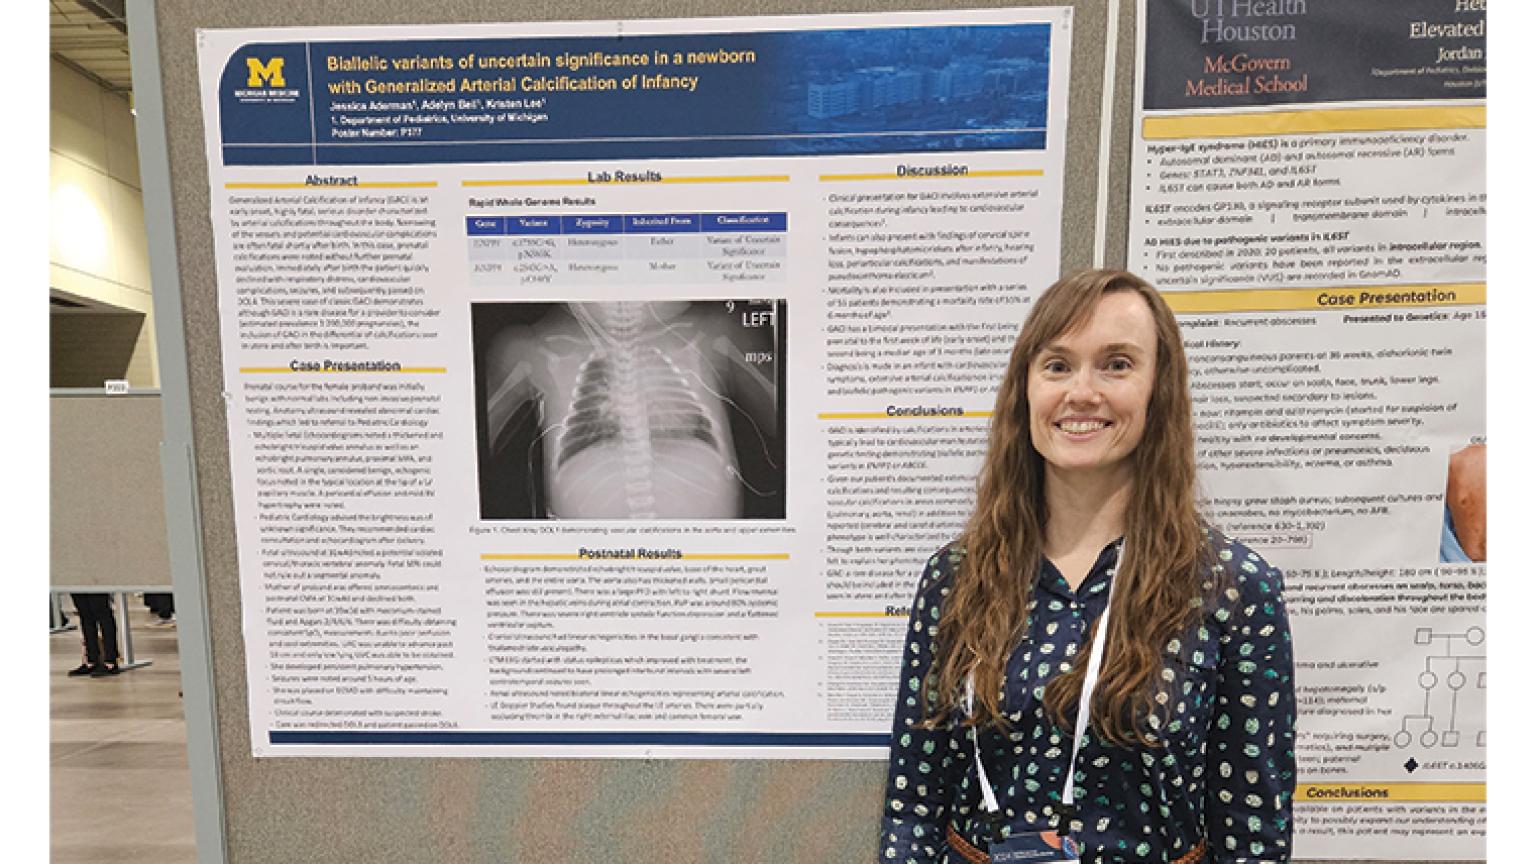 Jessica Aderman MD posing with her research poster at the American College of Medical Genetics Conference.